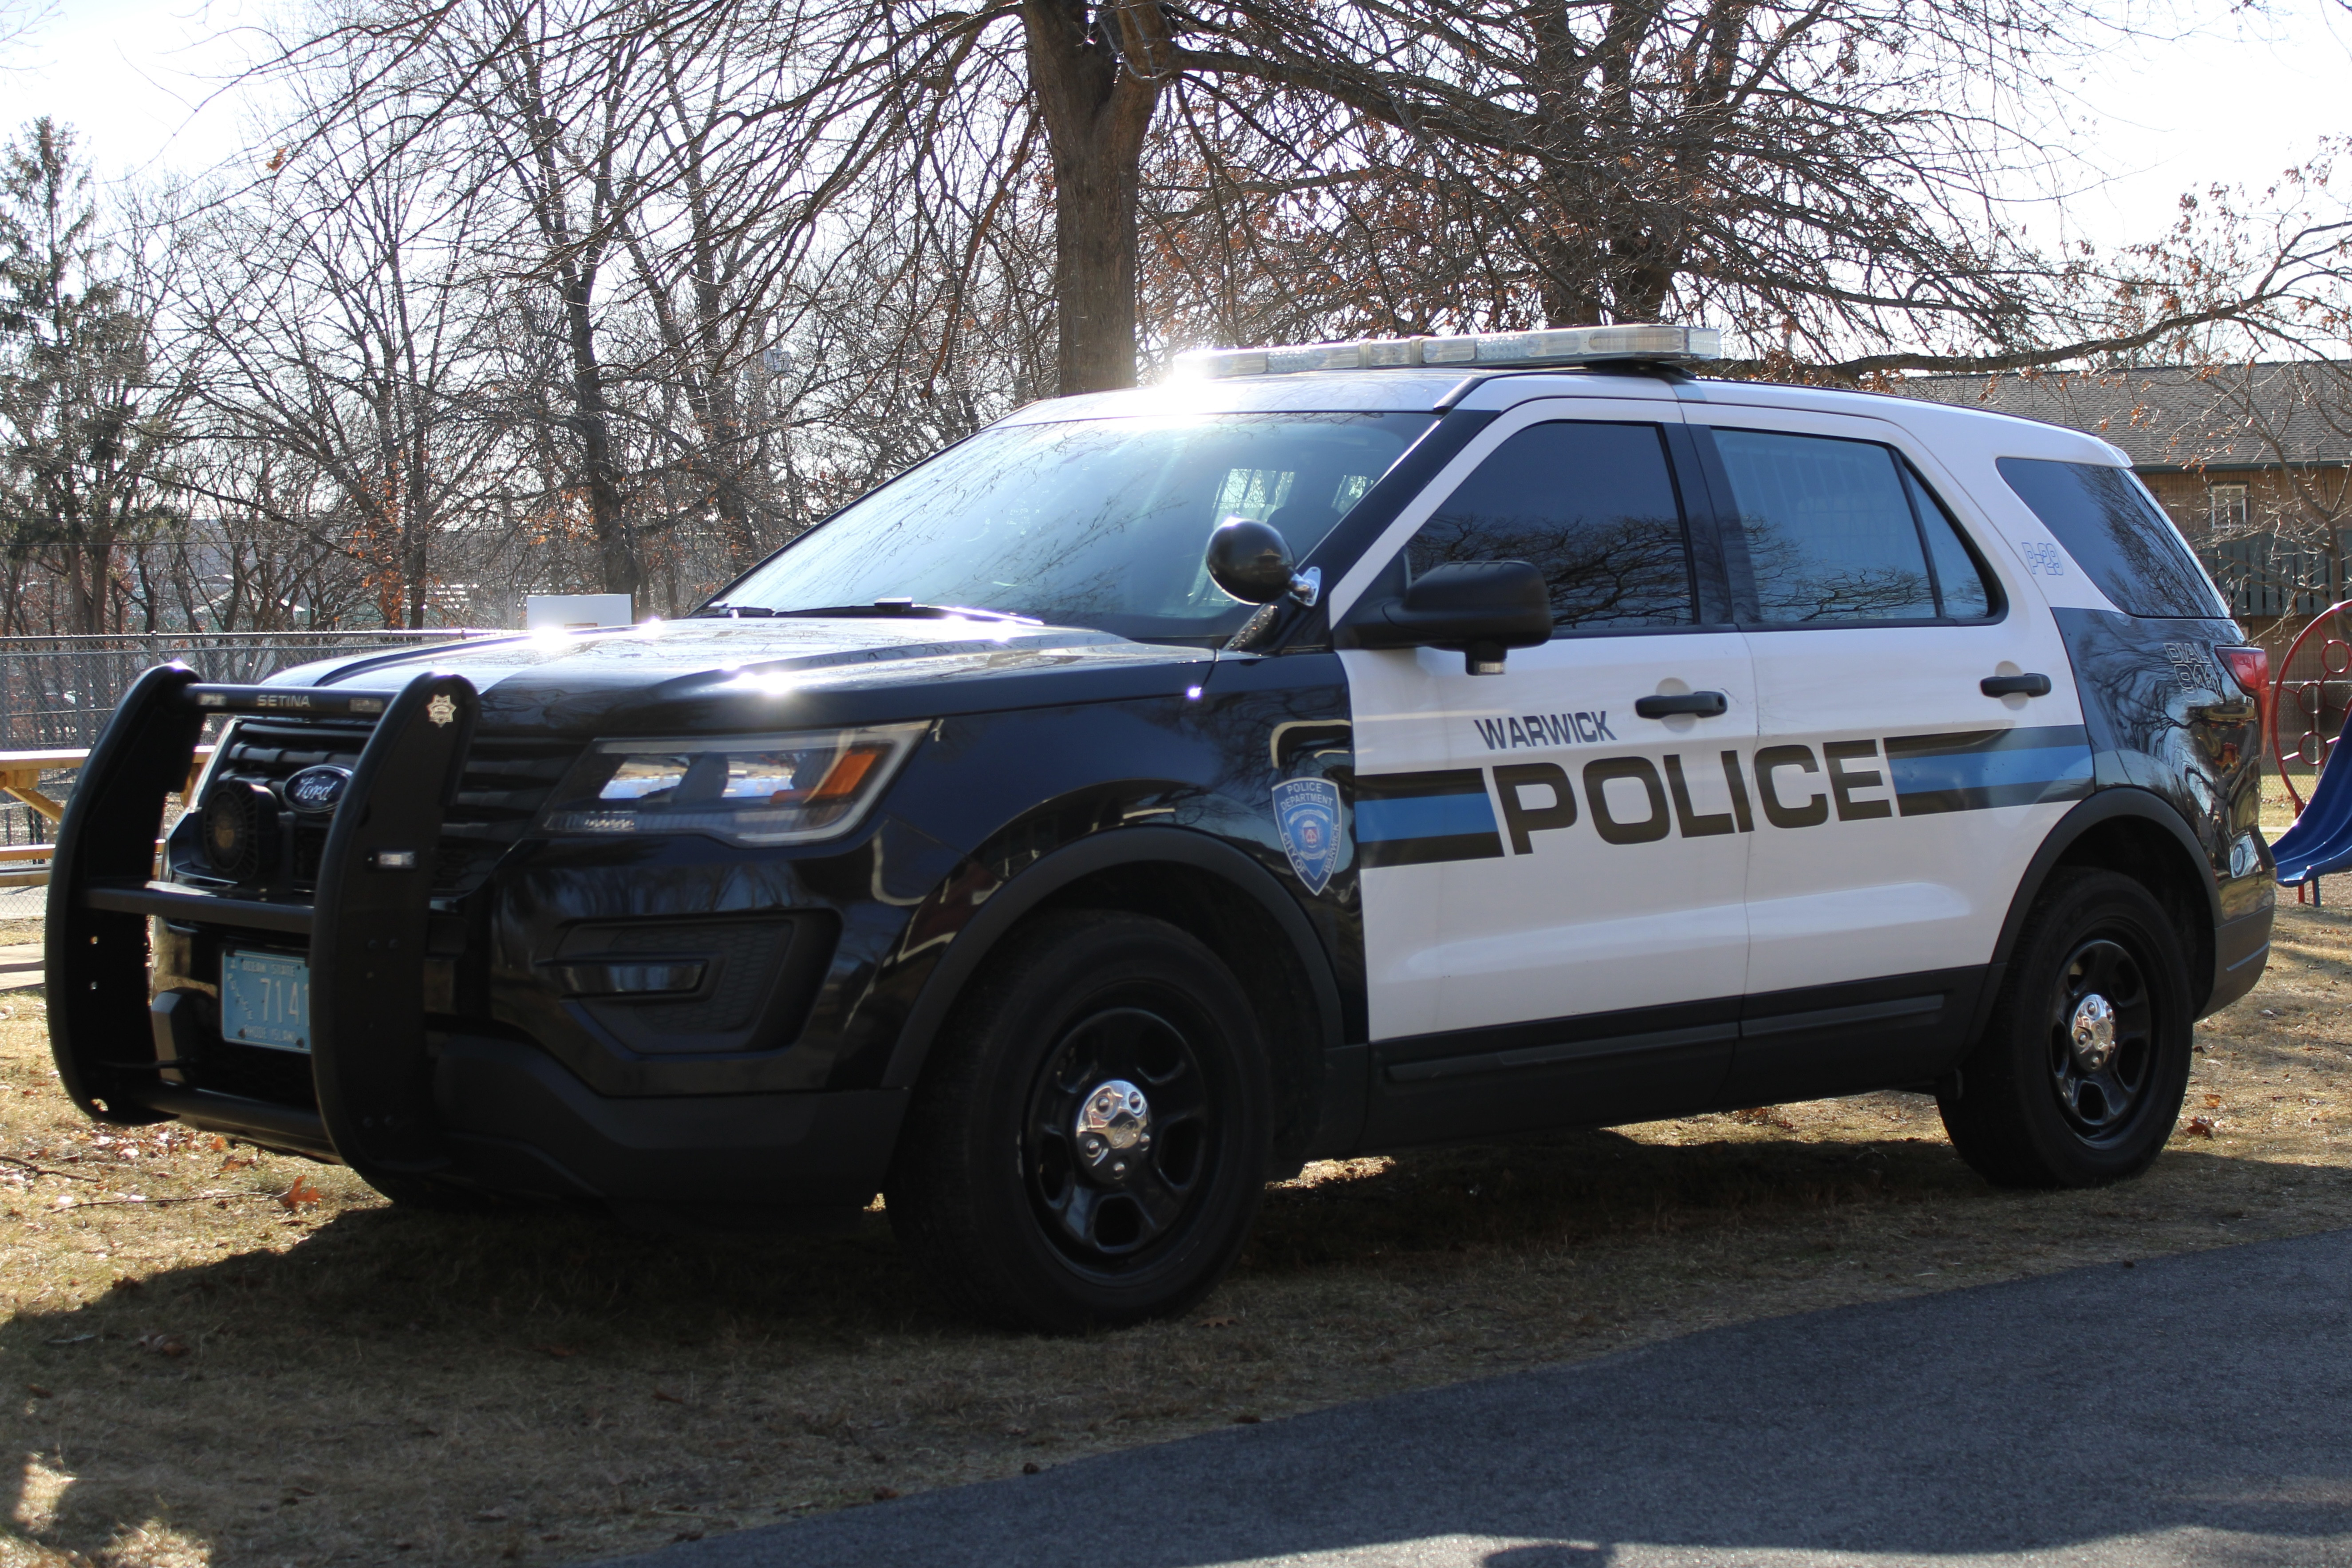 A photo  of Warwick Police
            Cruiser P-29, a 2019 Ford Police Interceptor Utility             taken by @riemergencyvehicles